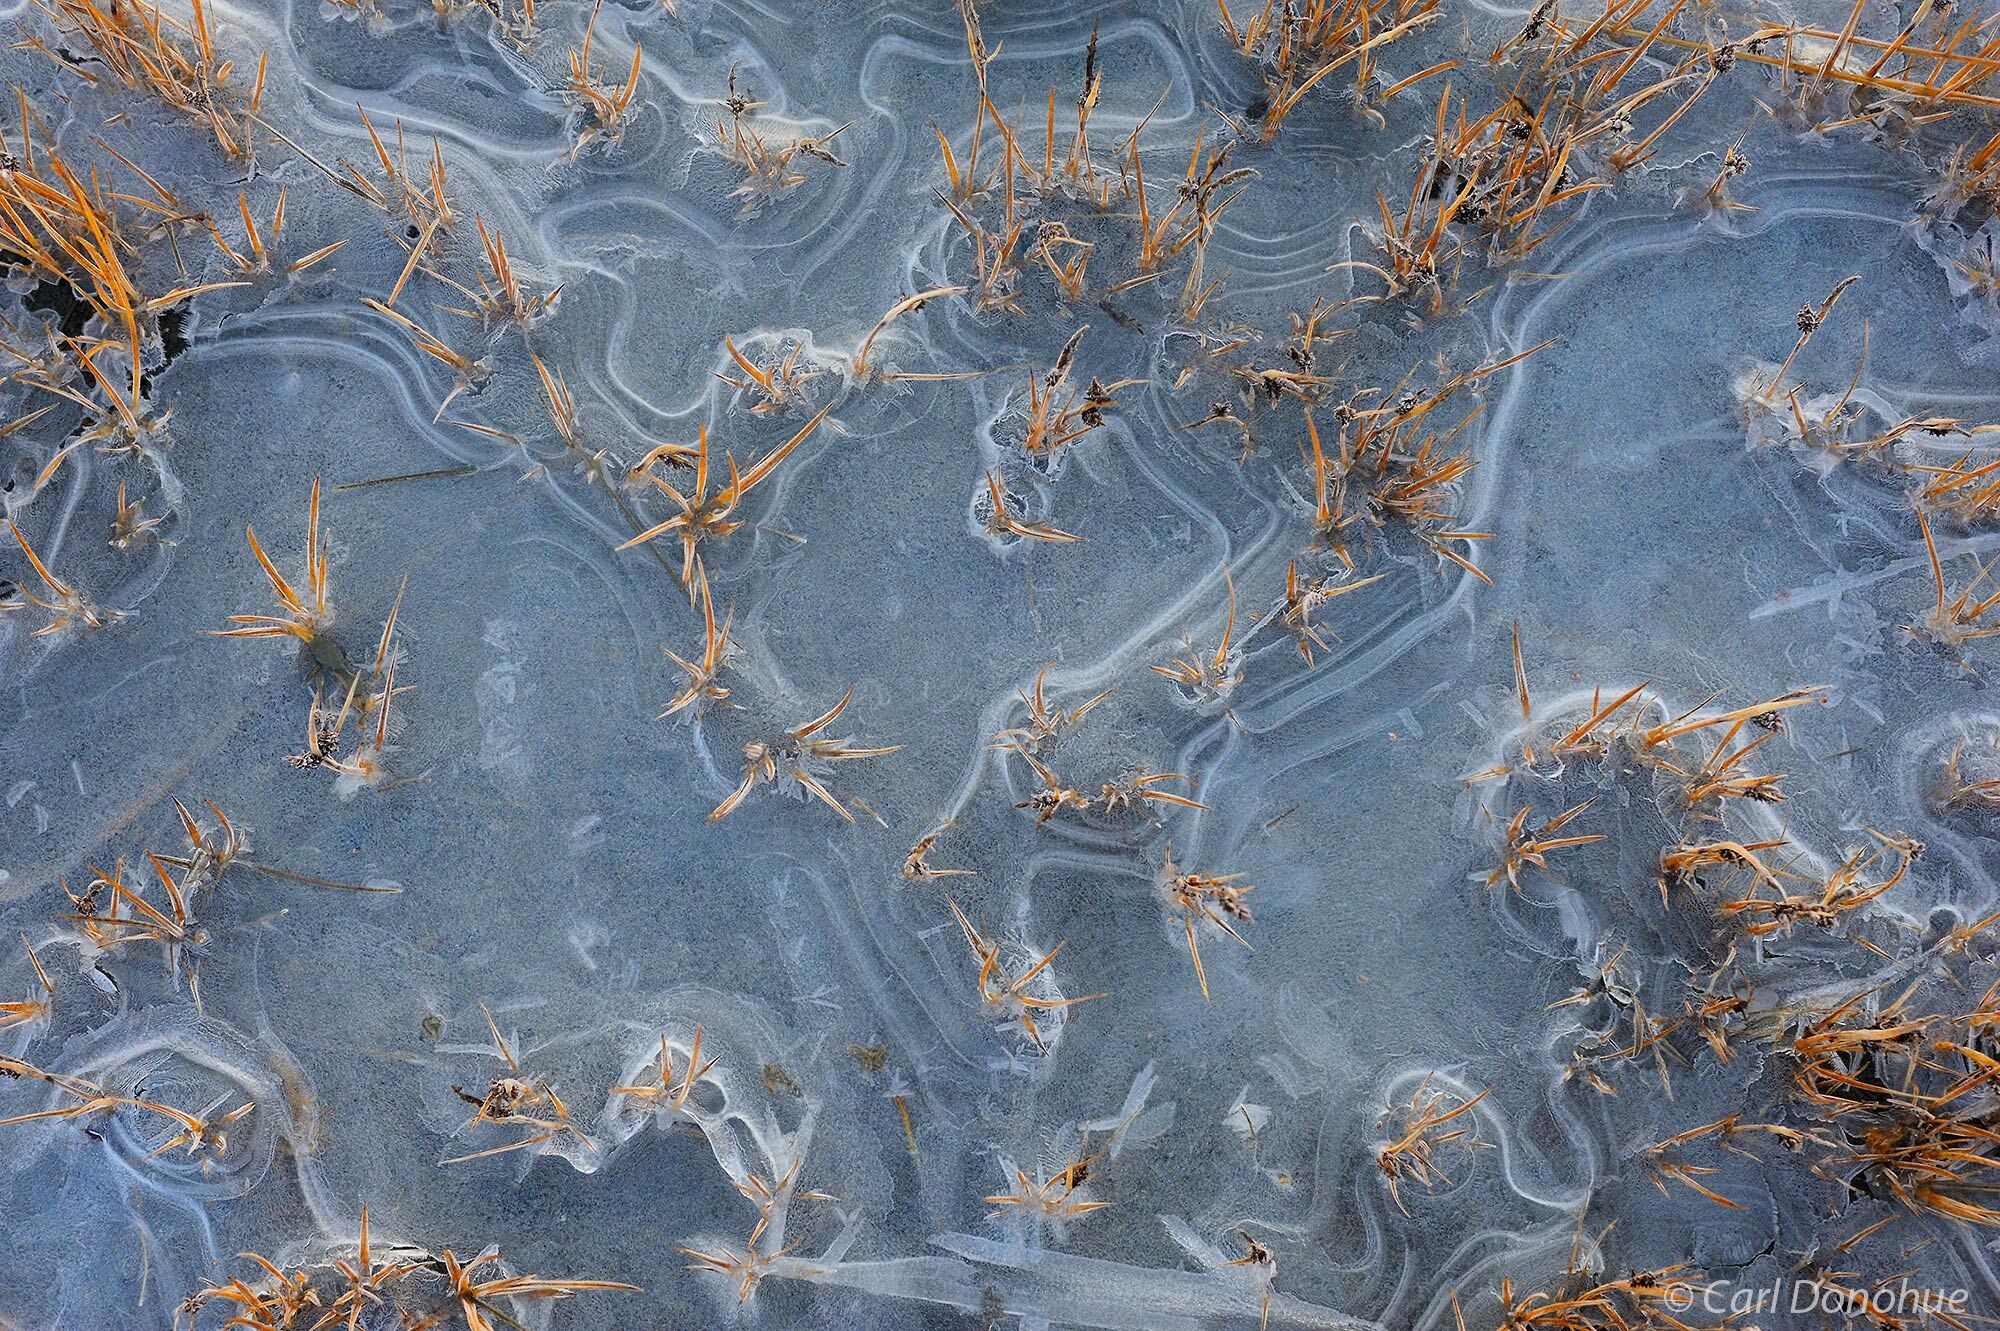 Ice patterns and dead grasses at freeze-up, late fall, on a small stream near Icy Bay, Wrangell-St. Elias National Park and Preserve...